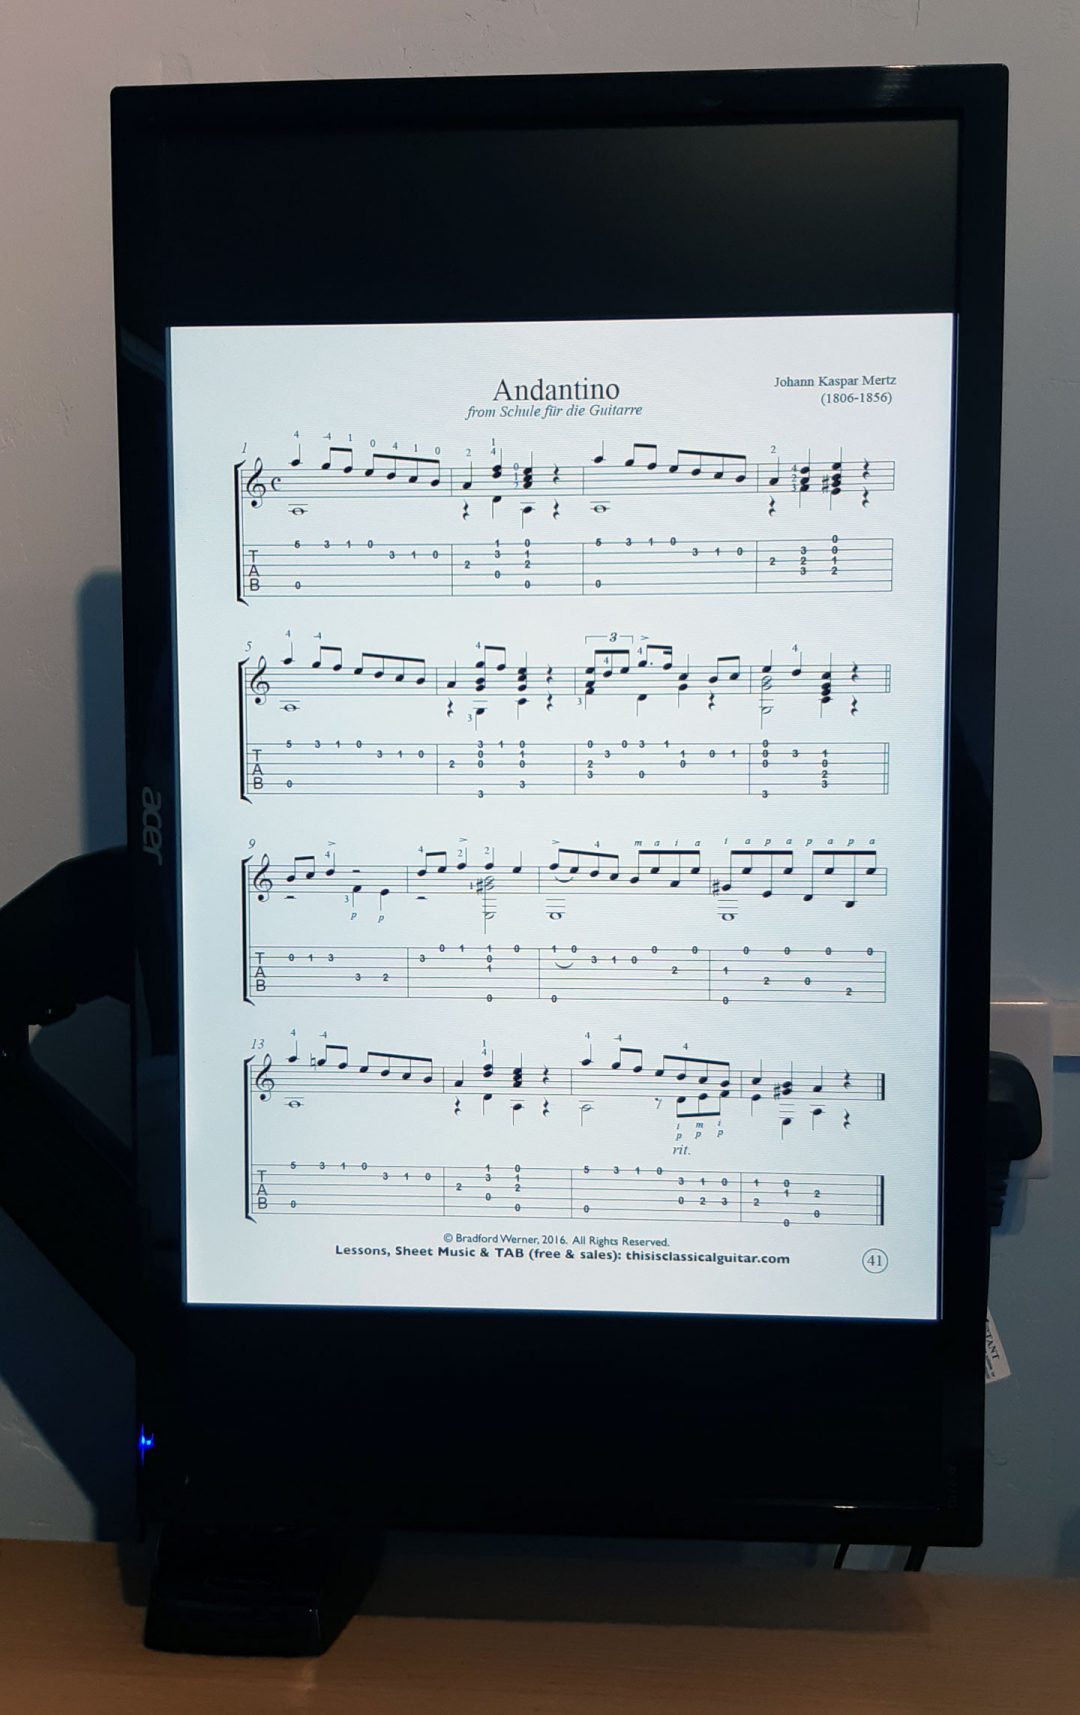 A Full Motion PC Monitor Arm can help you to read sheet music on your computer